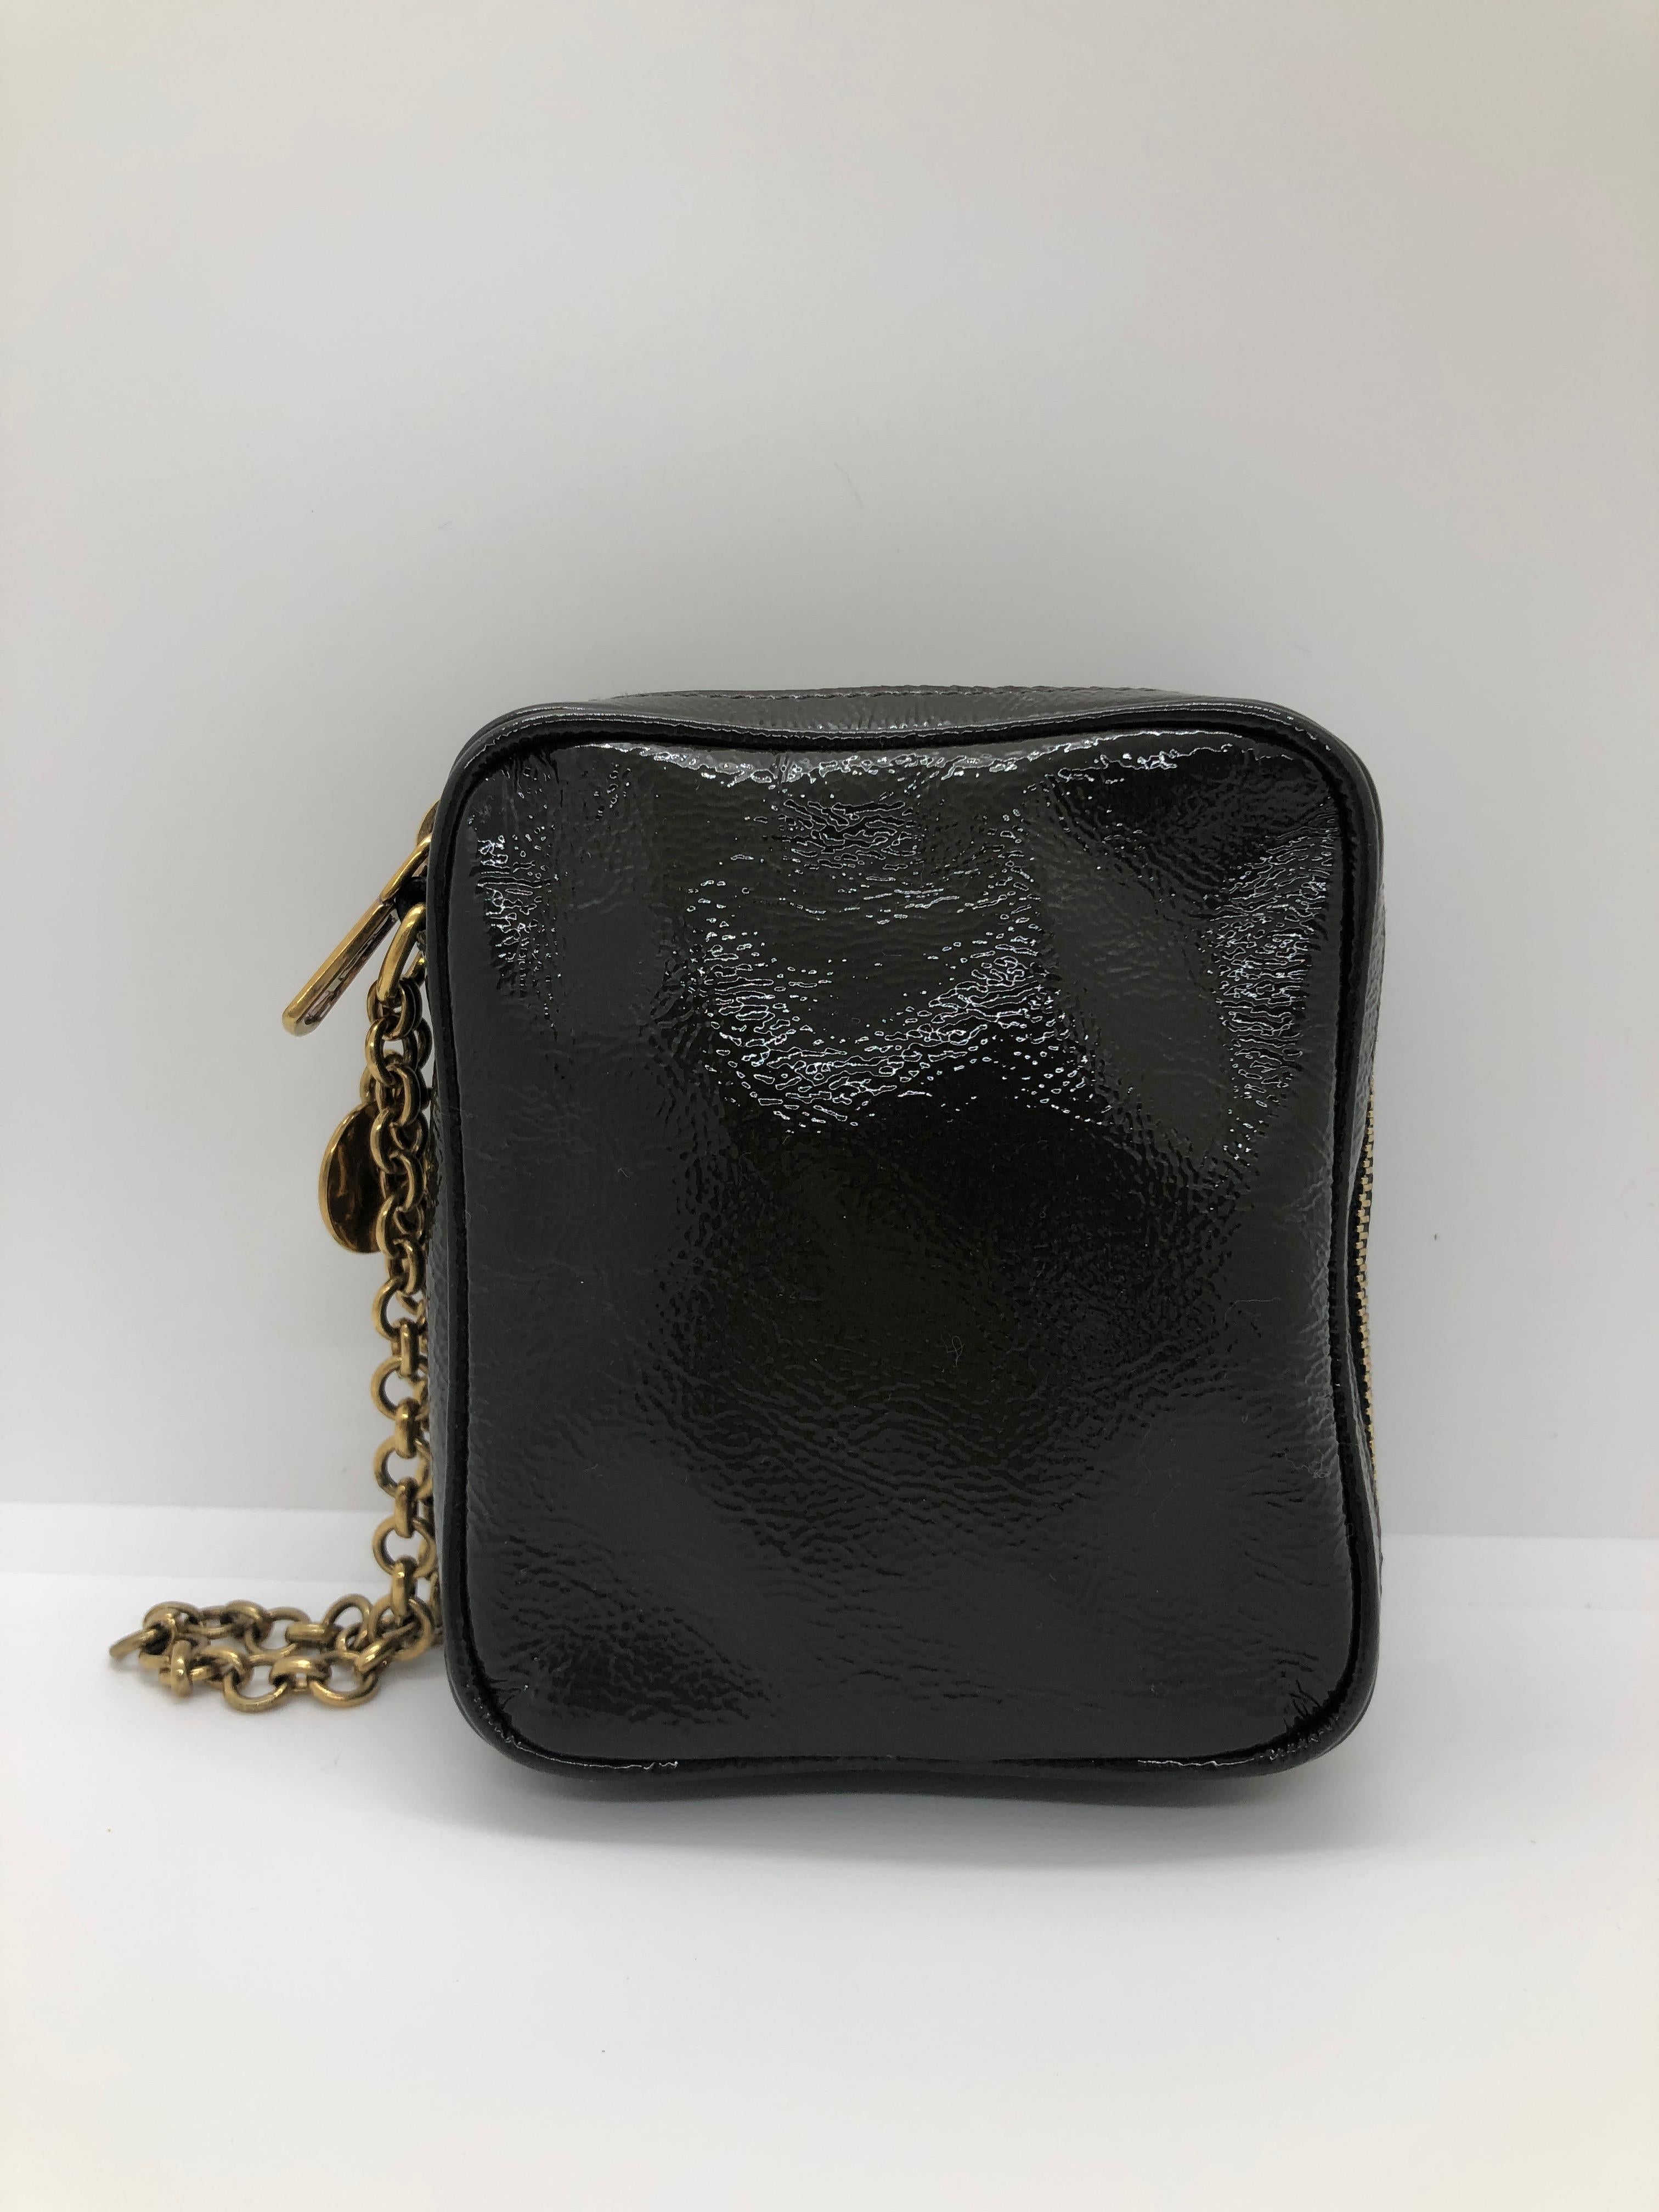 Make:  Yves Saint Laurent
Place of Manufacture:  Italy
Color:  Gray and gold
Materials:  Patent leather and gold tone metal
Condition:  Very good minor use condition
Type:  Wristlet / pochette
Style:  Offered is a YSL monogrammed gunmetal gray